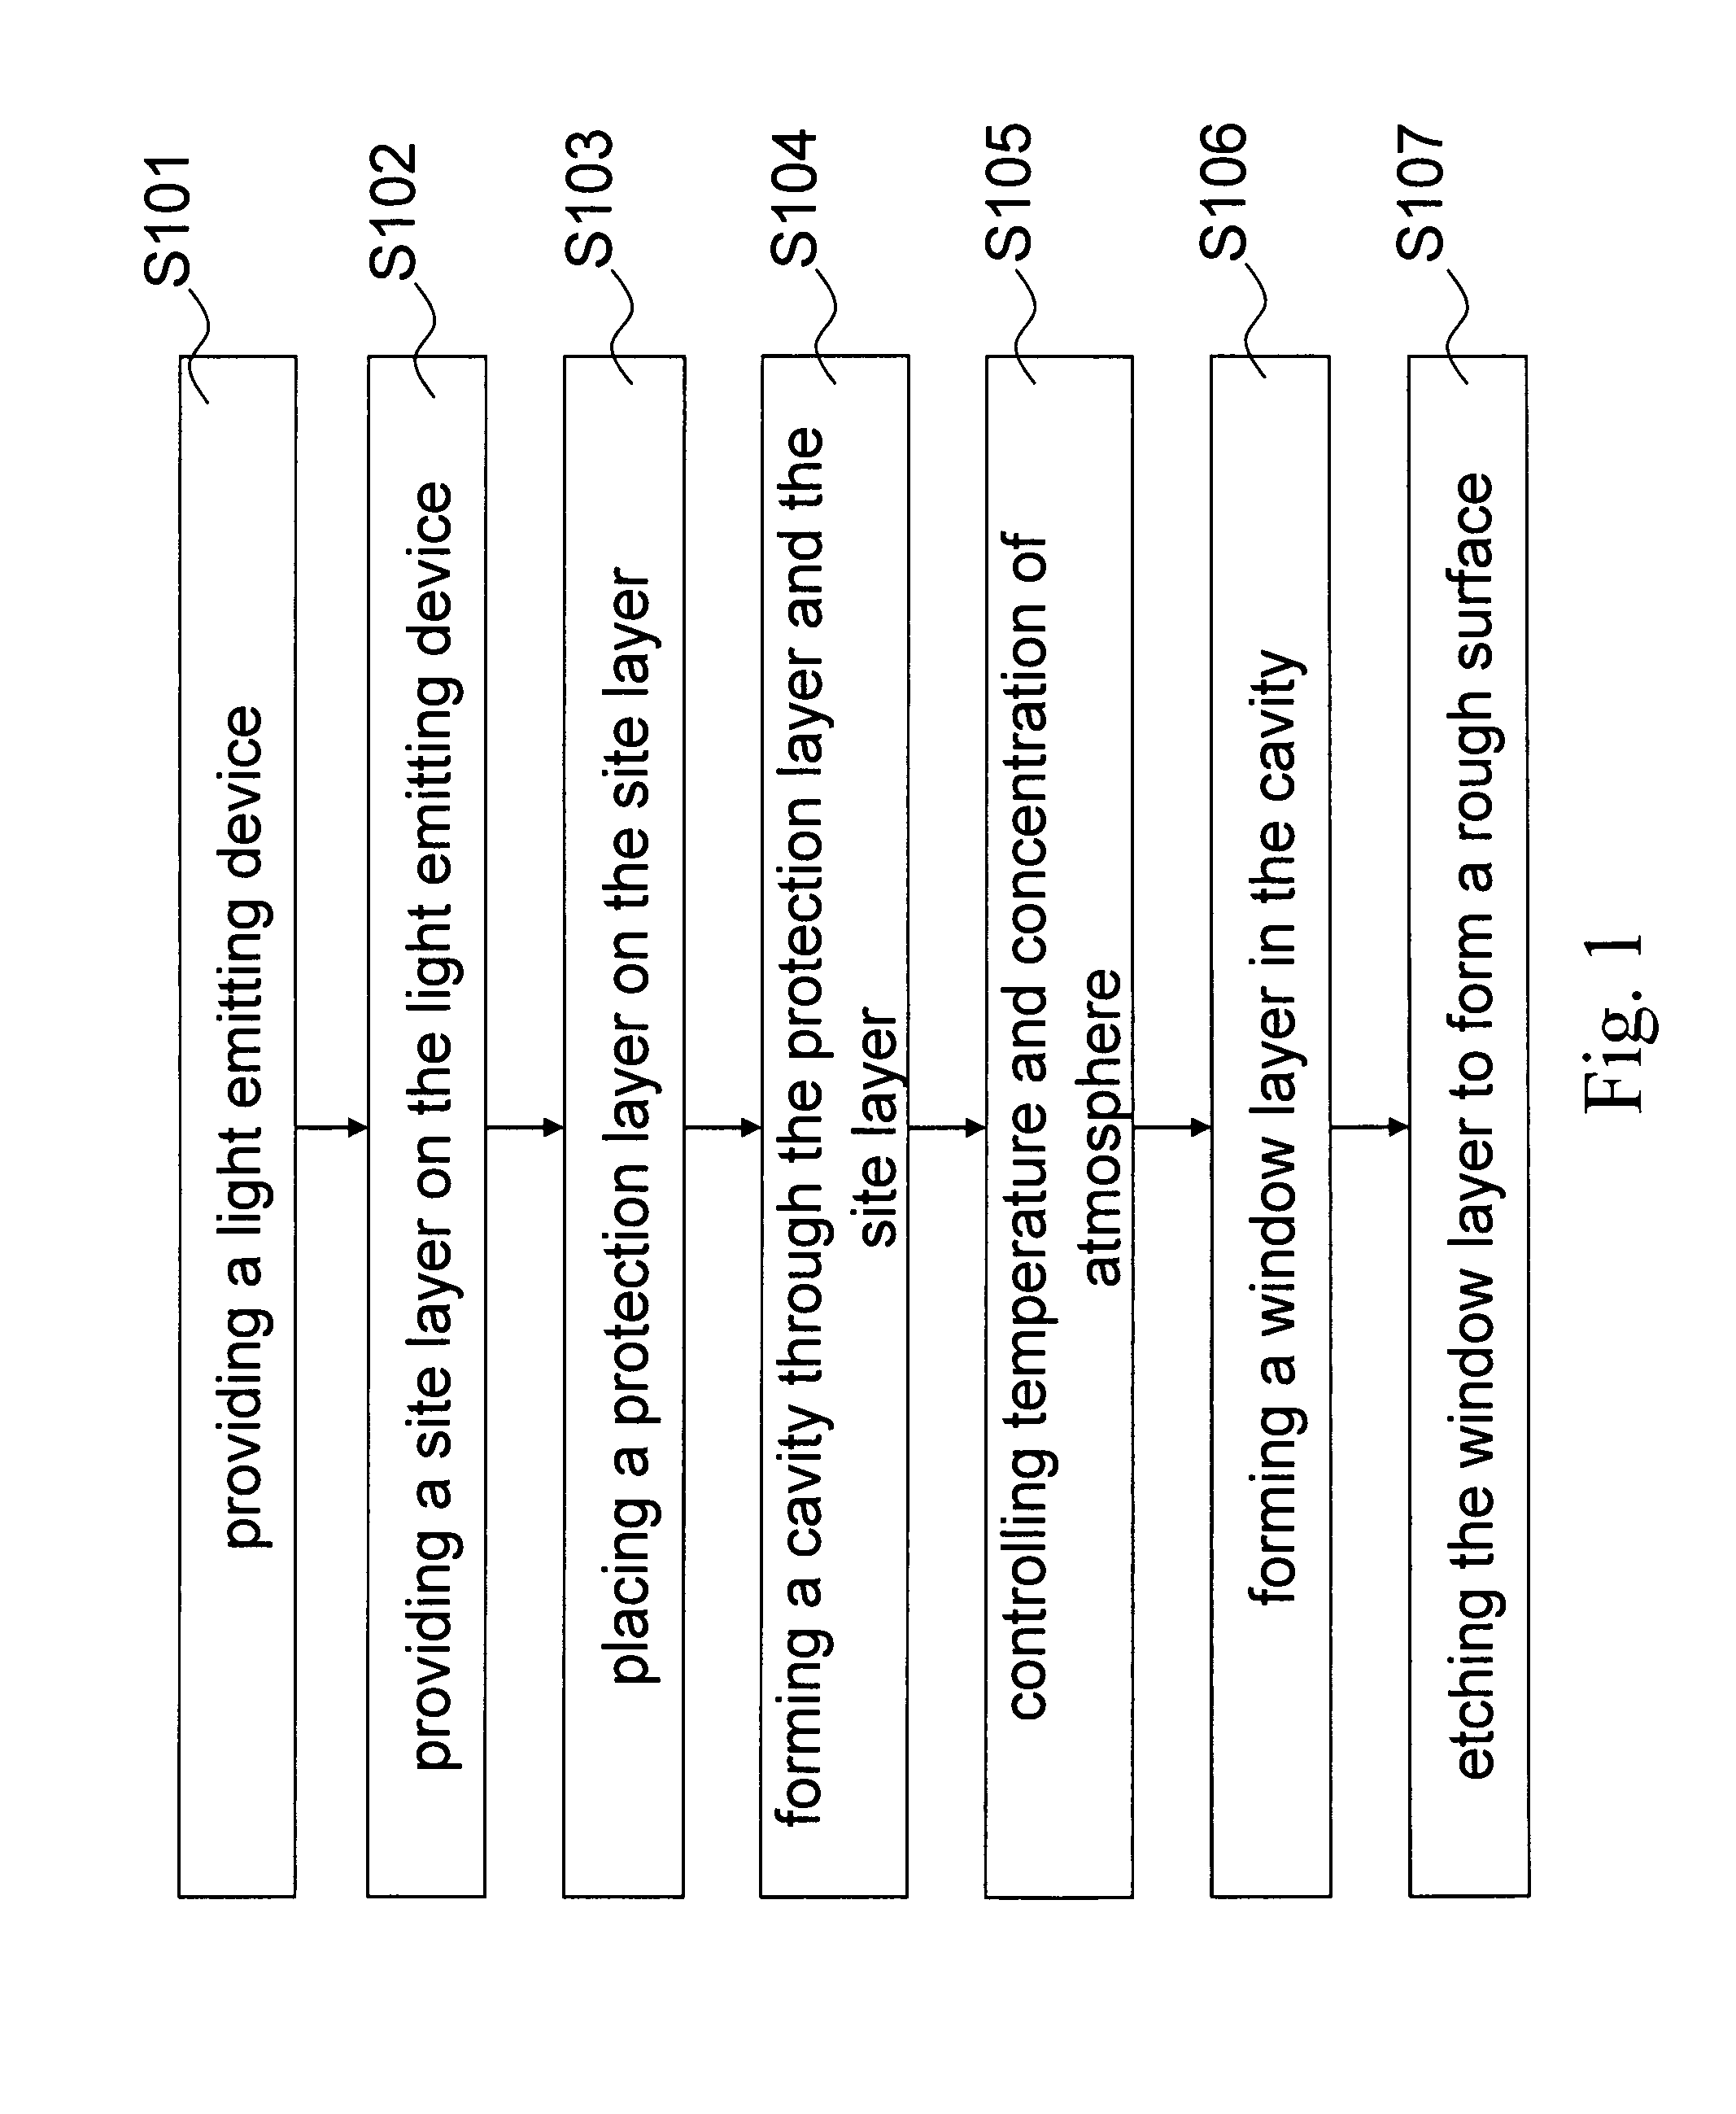 Method for enhancing electrical injection efficiency and light extraction efficiency of light-emitting devices